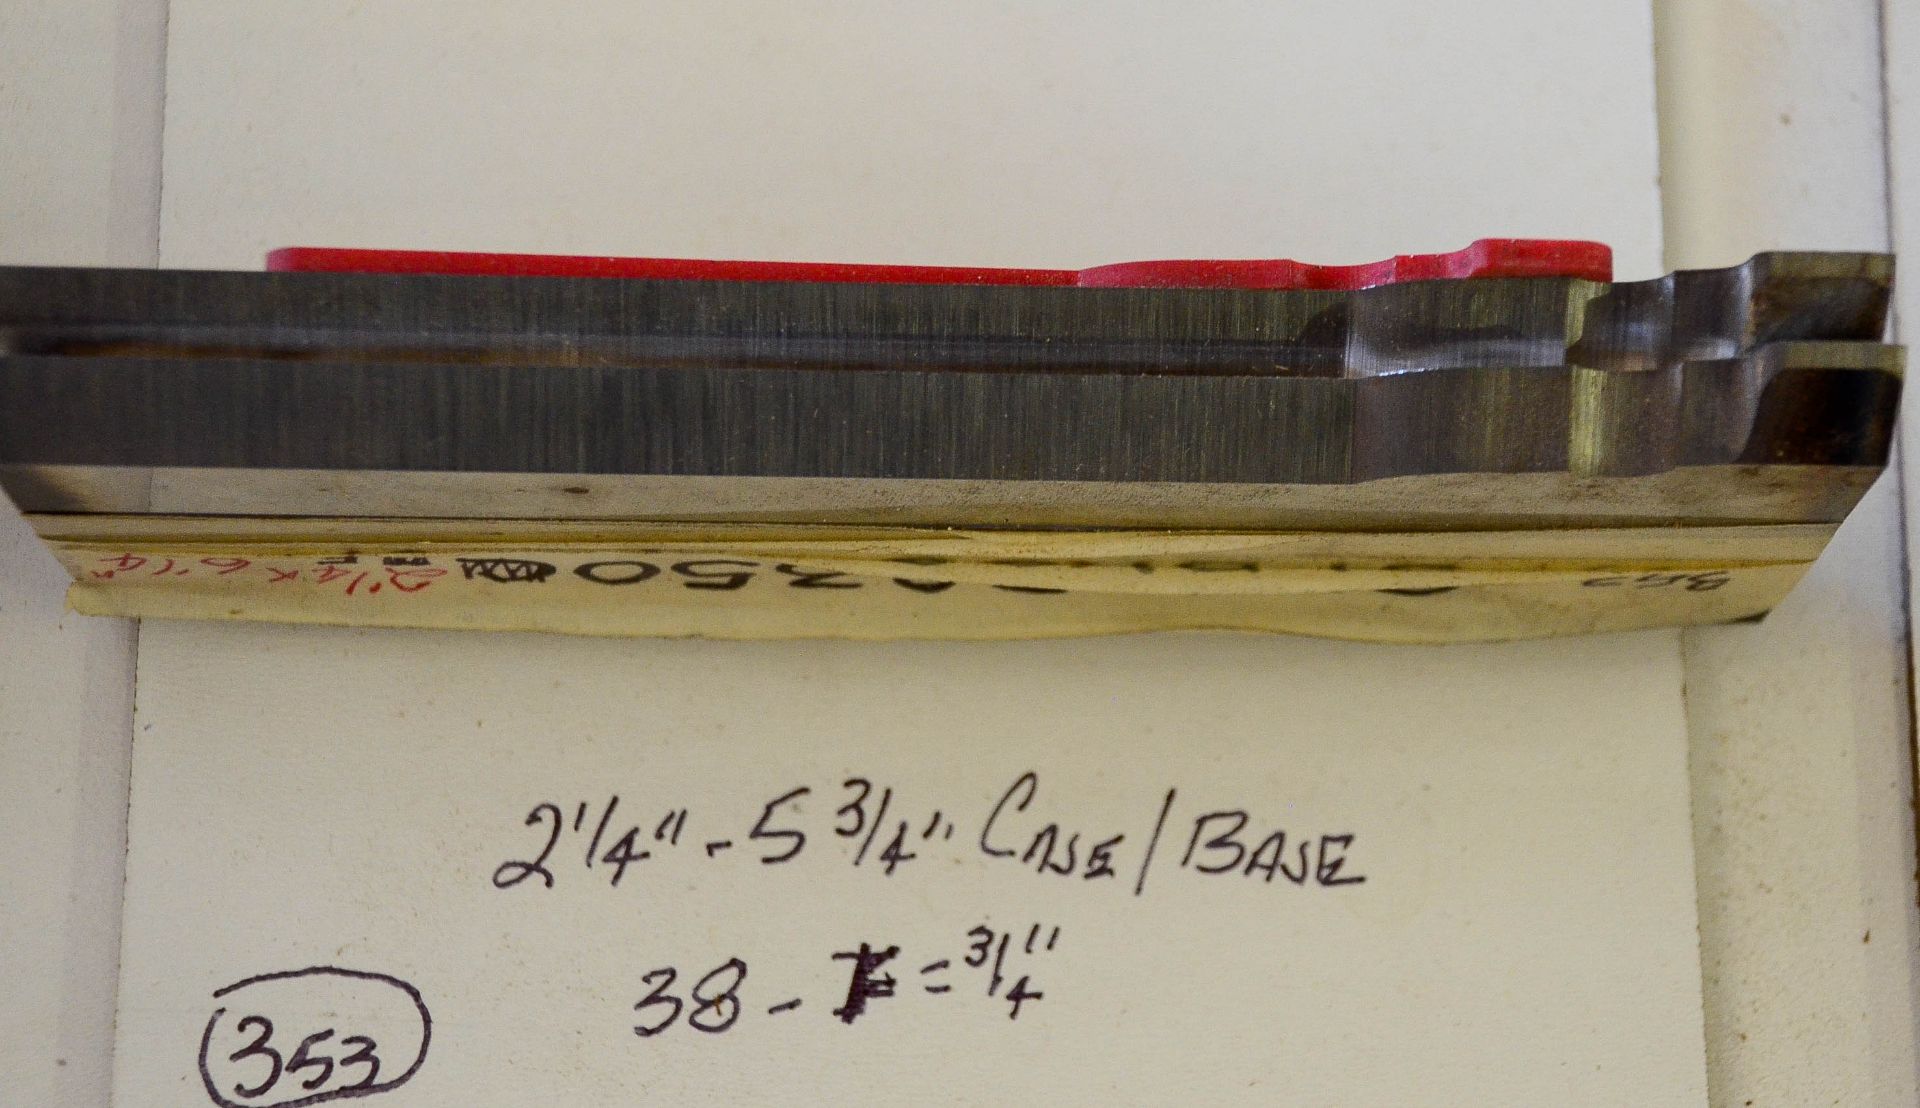 Moulding Knives, 2-1/4"- 5-3/4" Case/Base, 38 - F = 3/4", Knives are in Good Condition and Ready - Image 2 of 2